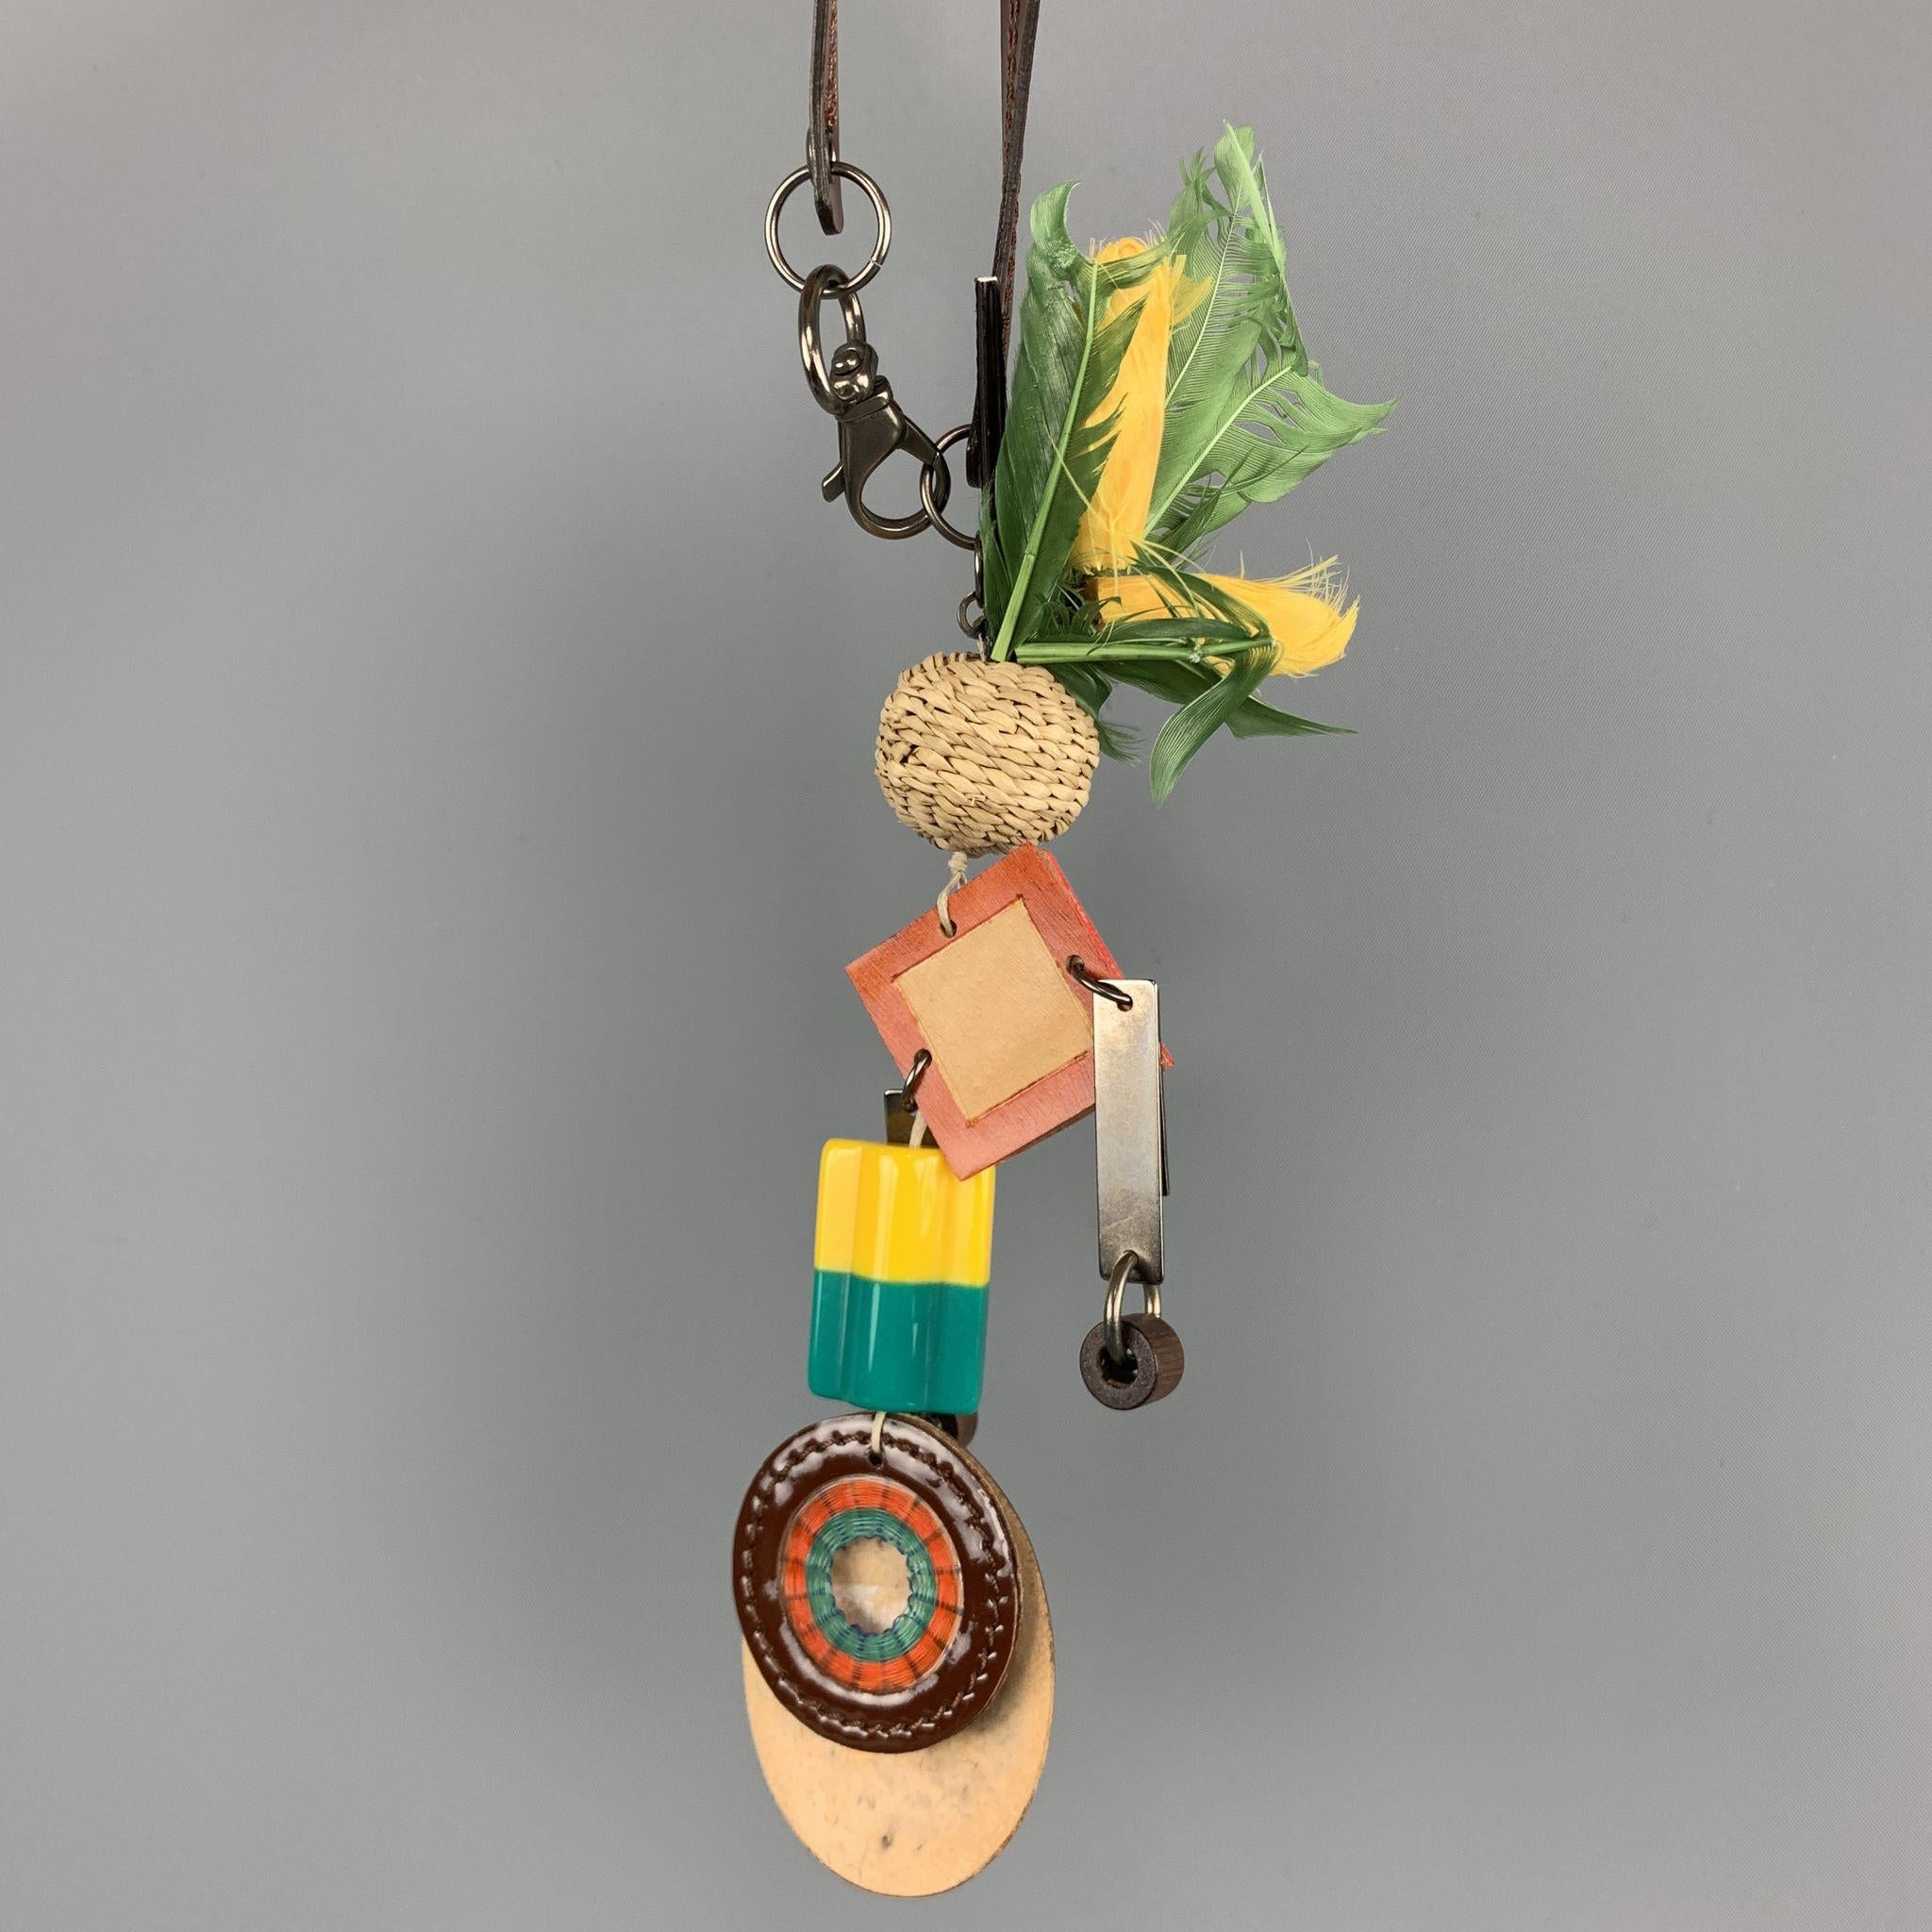 MARNI Key Ring Bag Charm comes in multi-color tones in mixed materials, with a brown patent leather strap, green feathers, straw, plastic and silver tone metal hardware, contrast stitching, and a lobster clasp closure. With dust bag and box.
